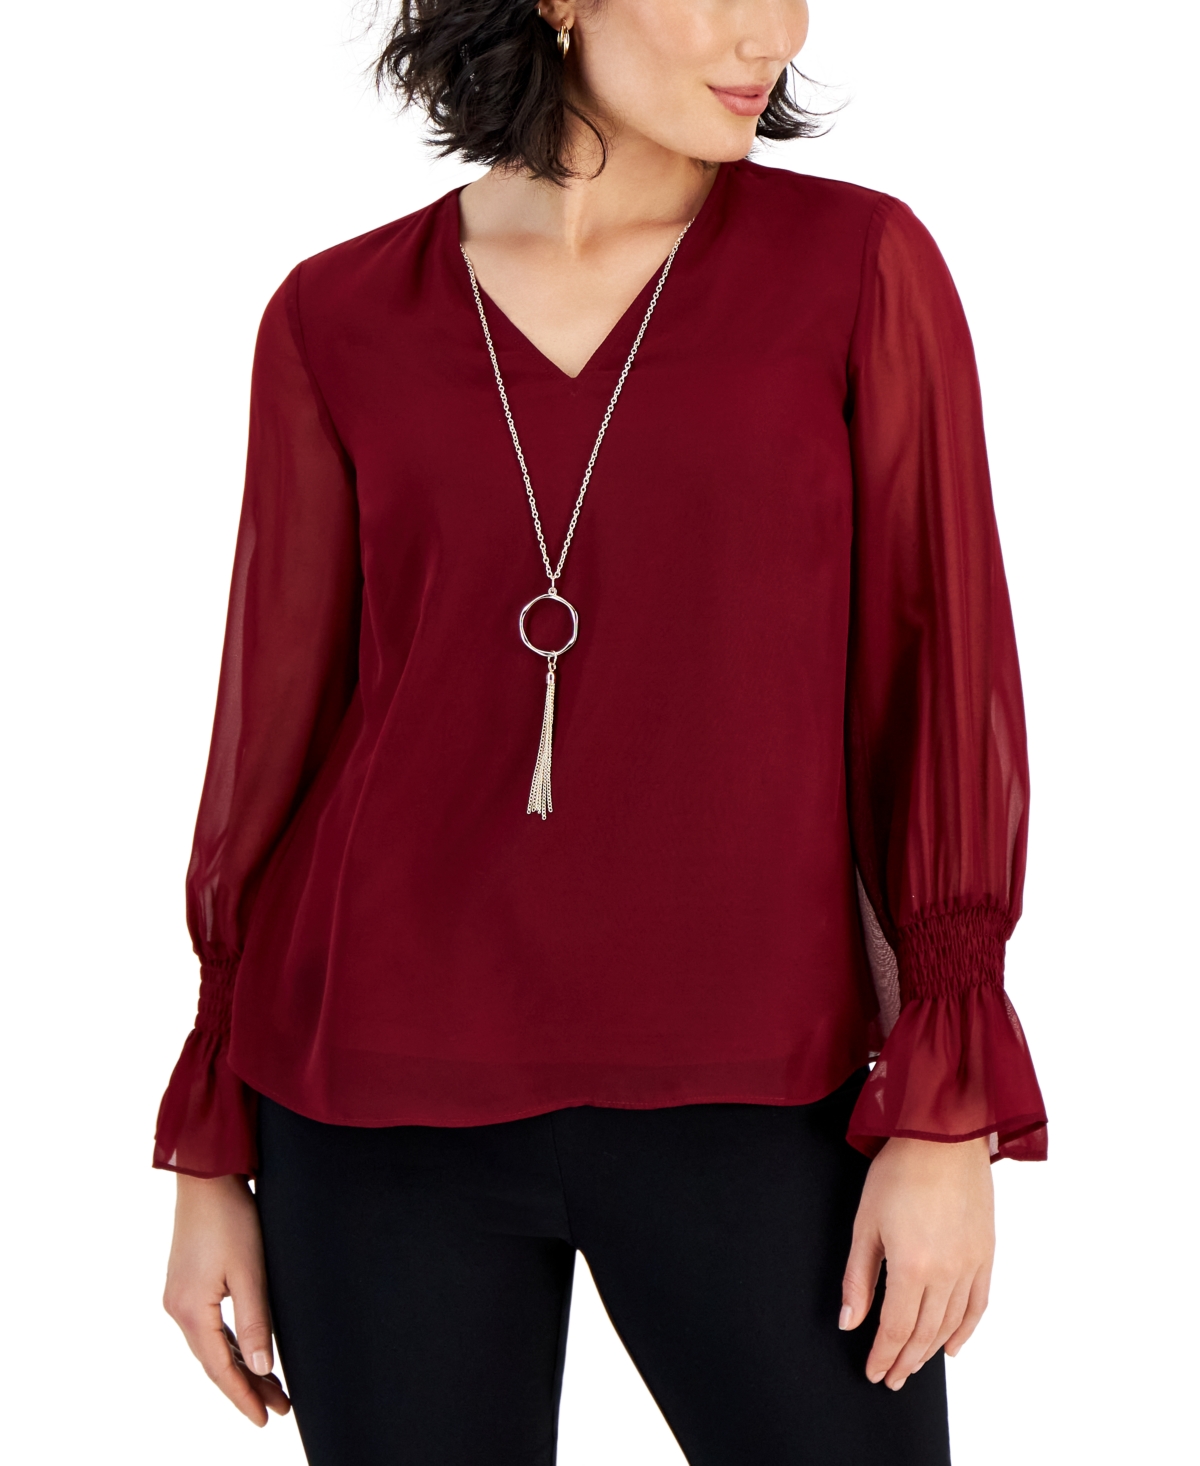 Petite Smocked-Sleeve Necklace Top, Created for Macy's - Dark Rust